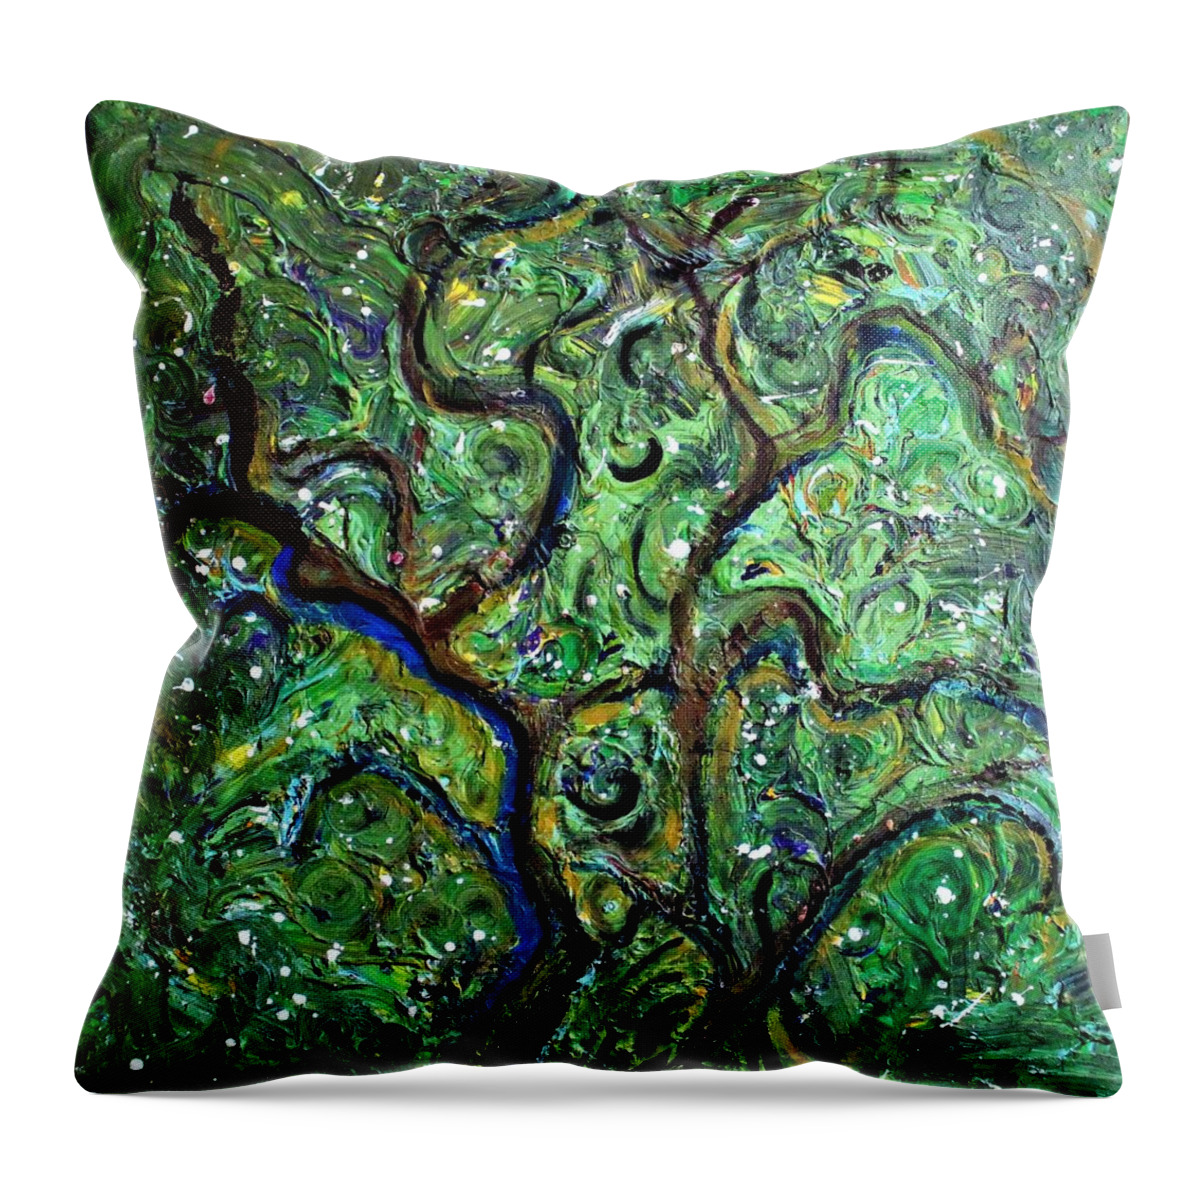 Green Throw Pillow featuring the painting Trees by Pam O'Mara